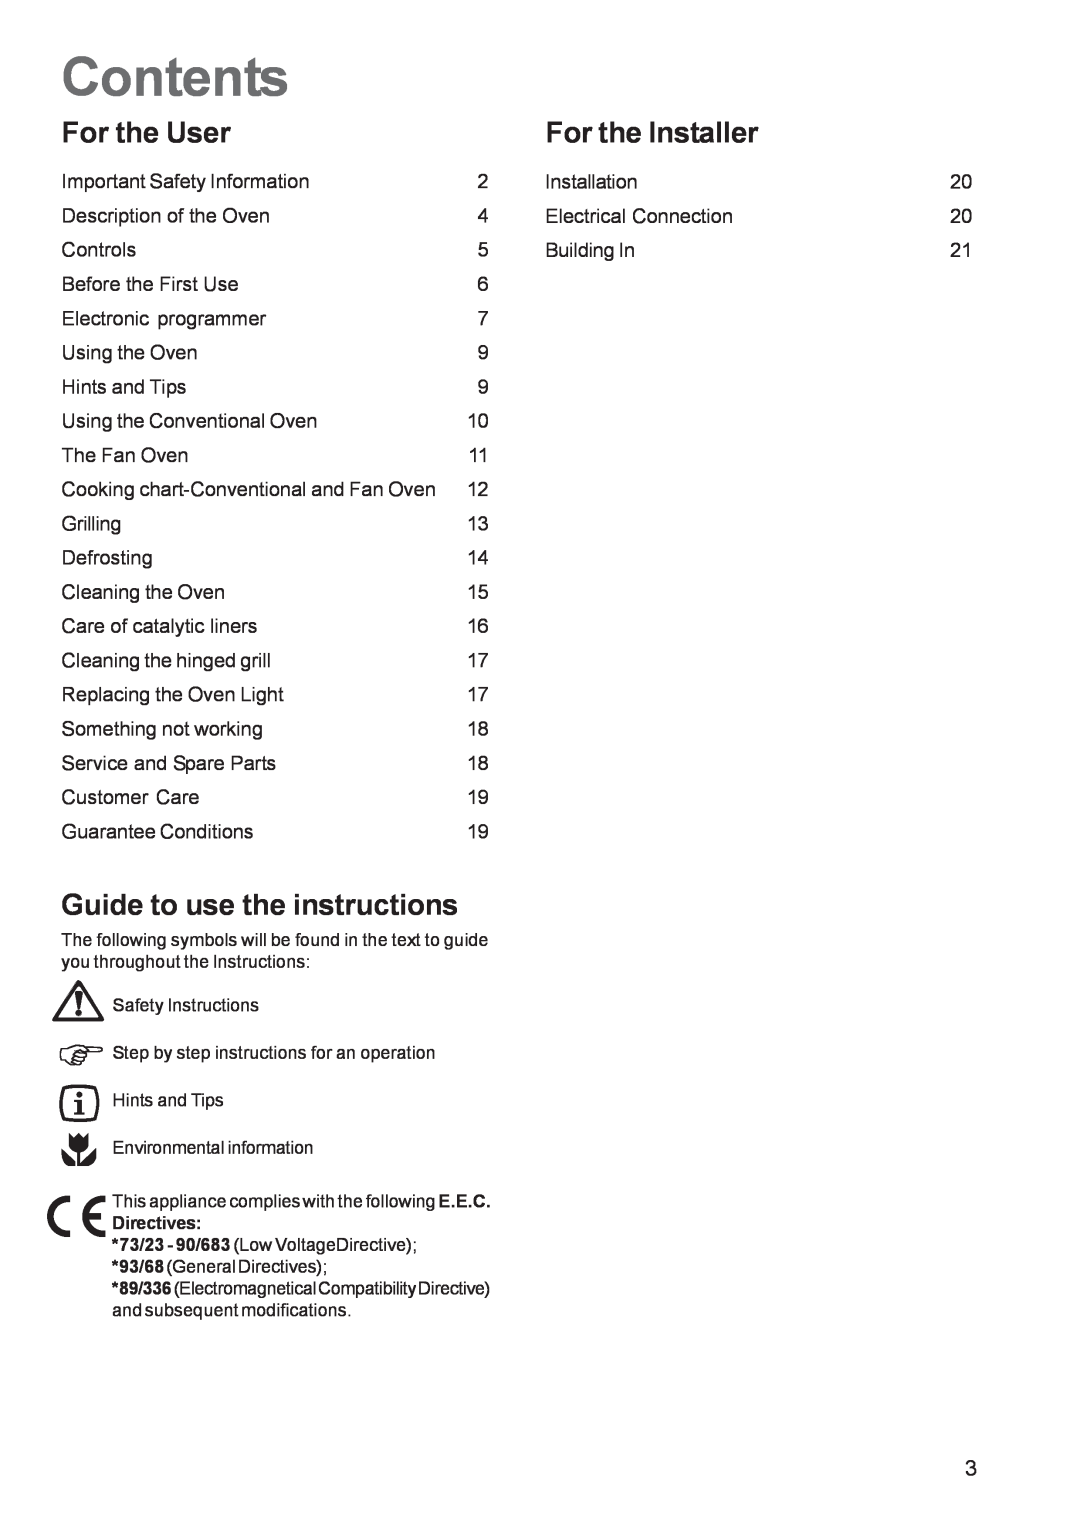 Zanussi ZBS 663 manual Contents, For the User, For the Installer, Guide to use the instructions 